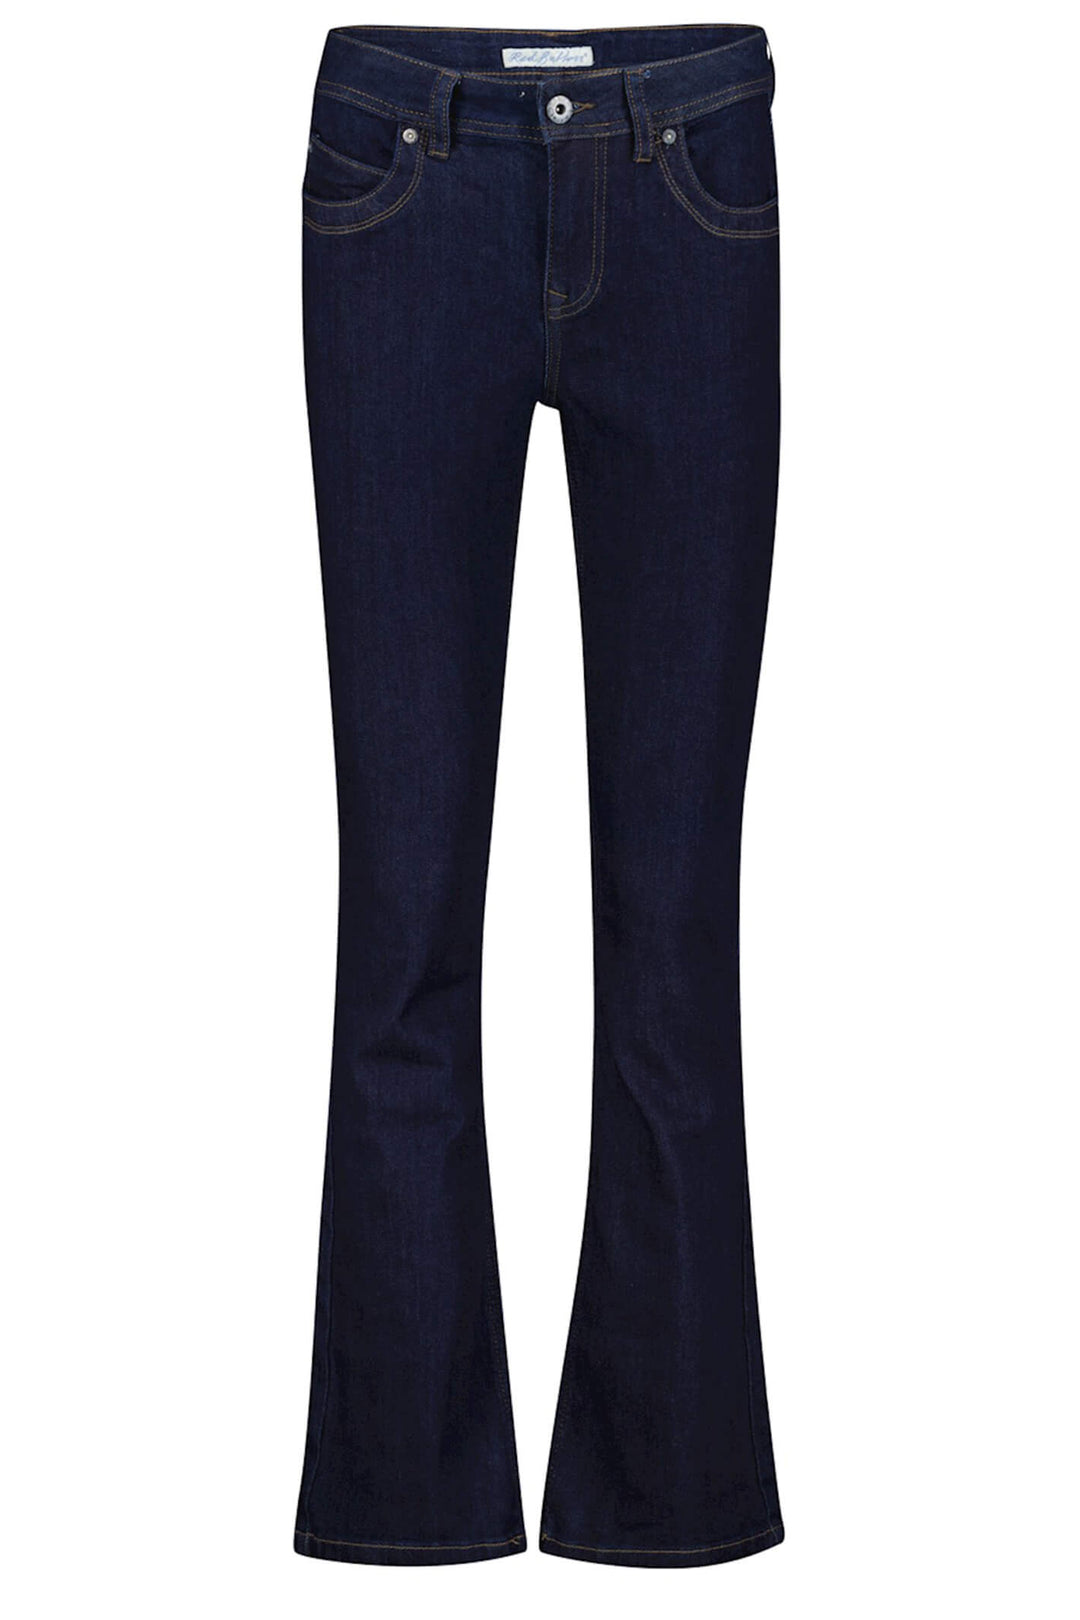 Red Button SRB4137 Babette Classic Blue 31 Inch Flared Jeans - Dotique